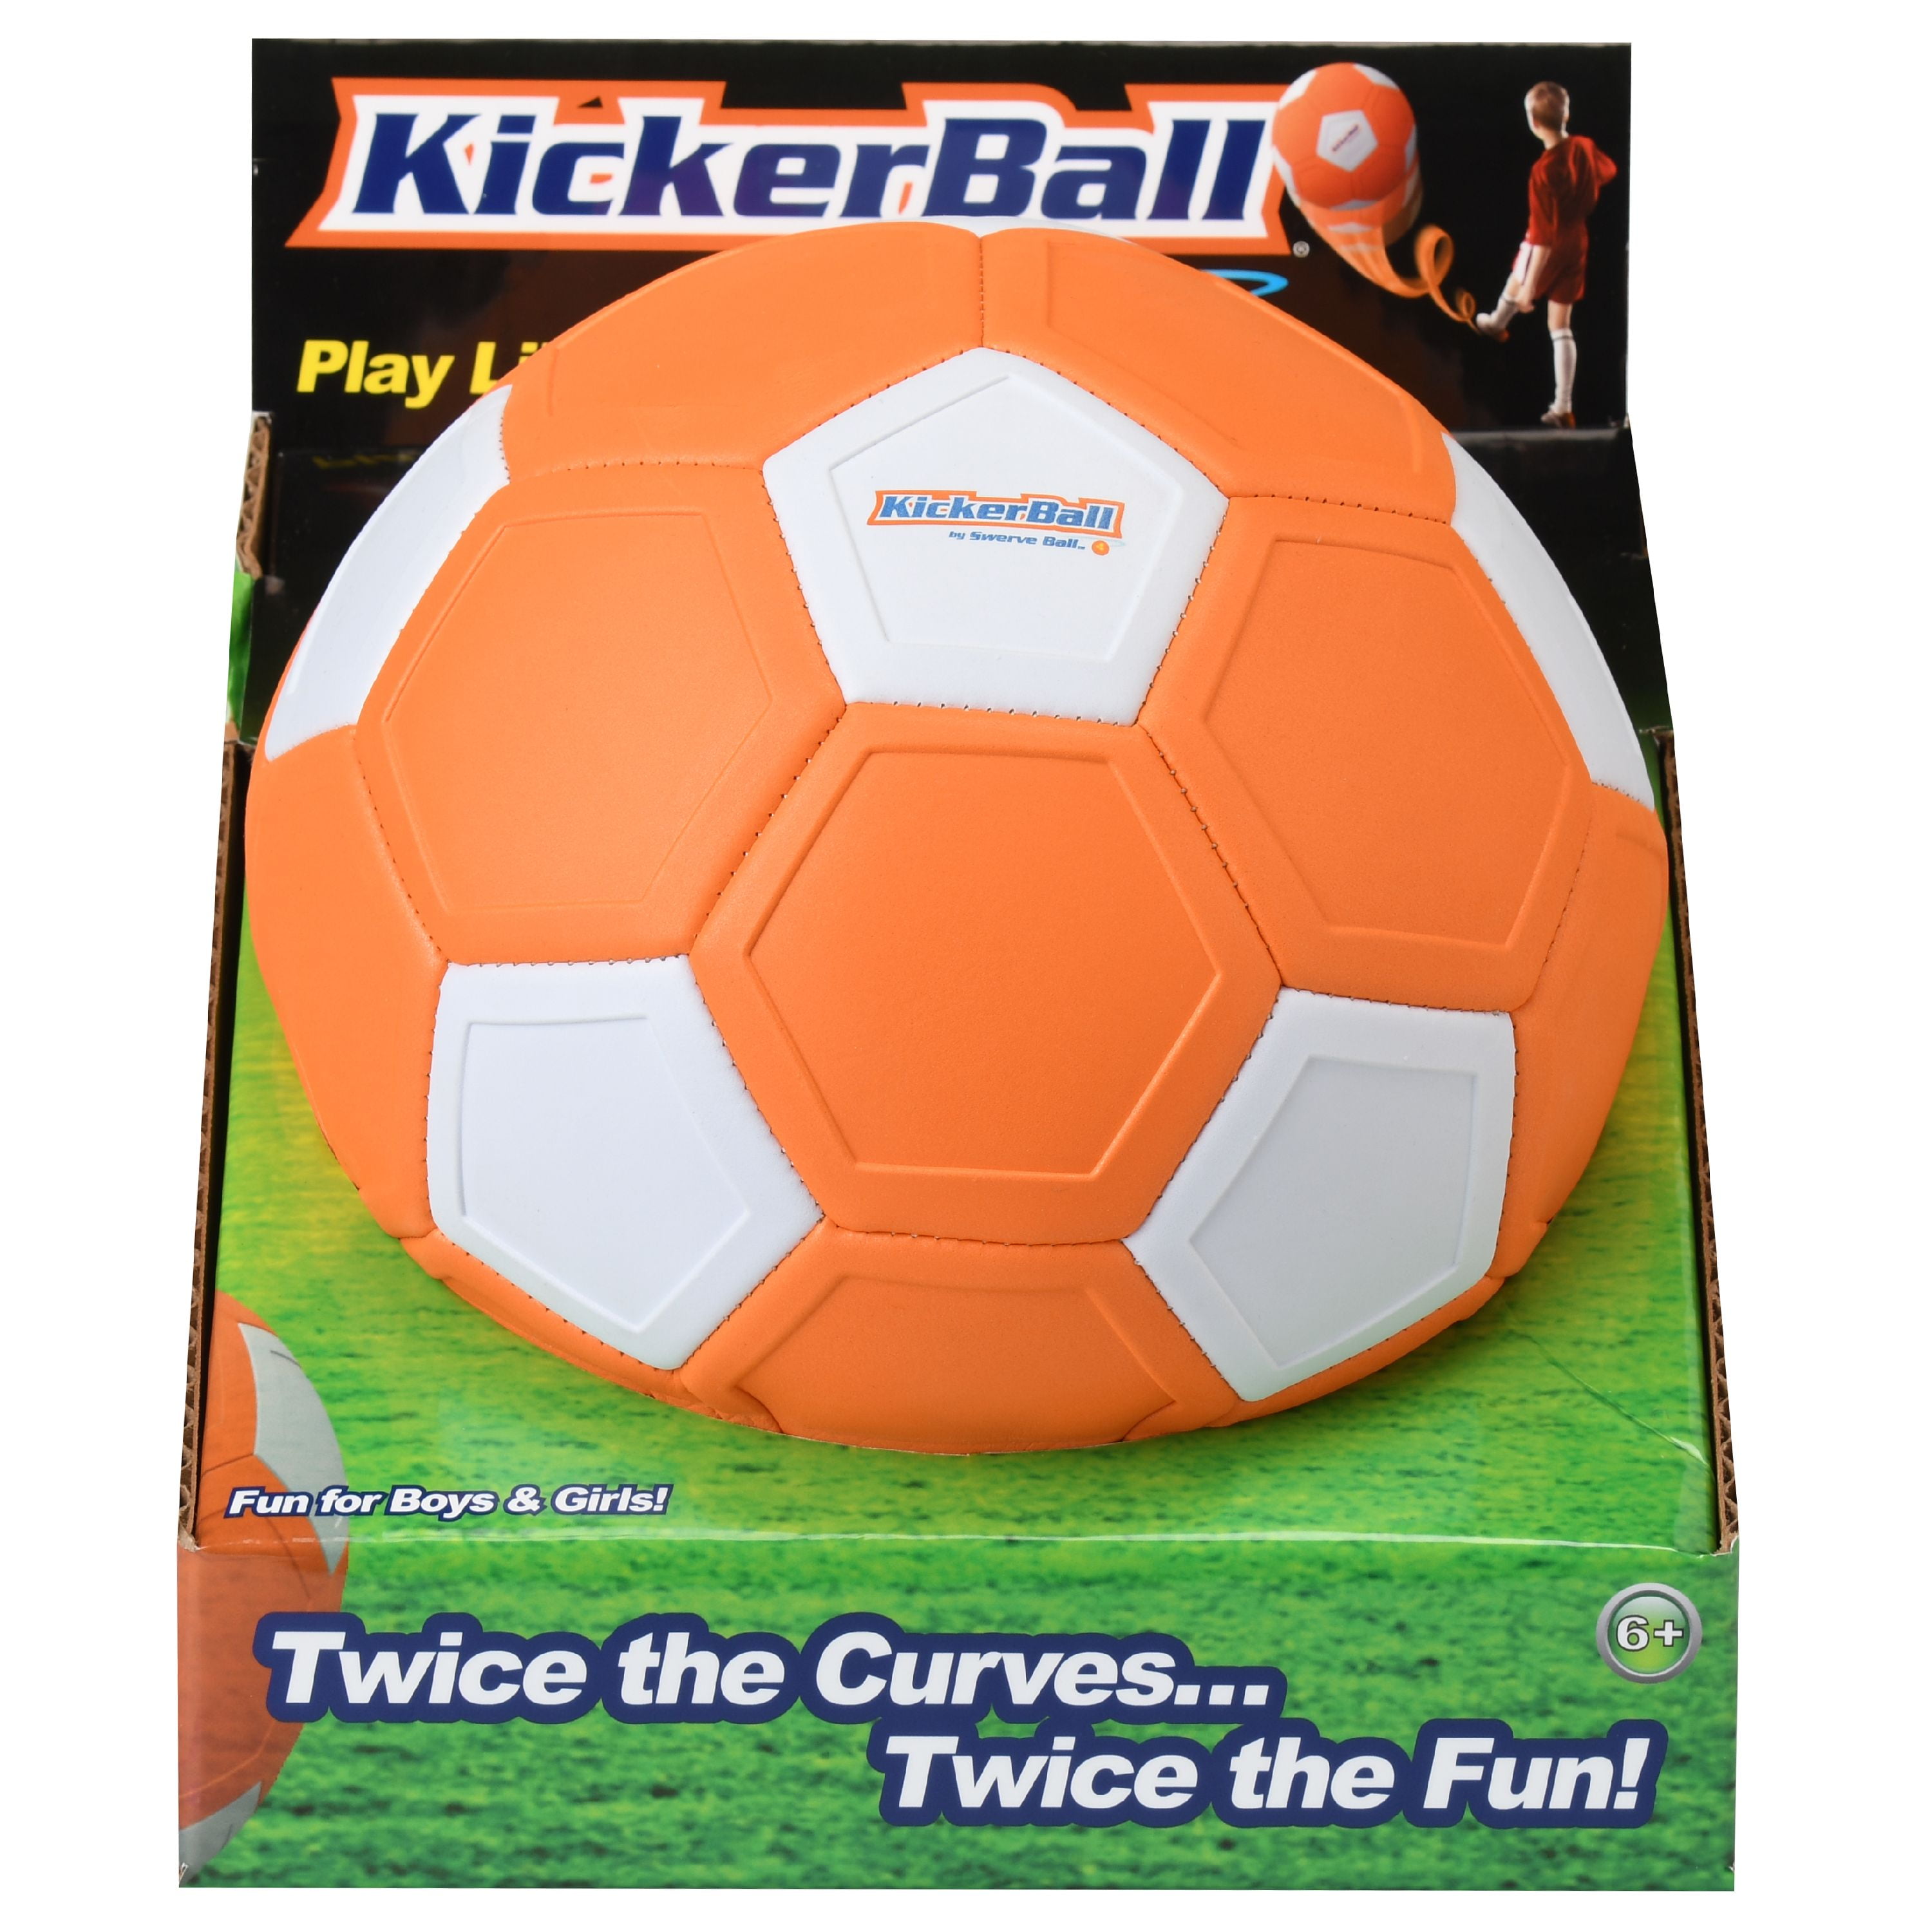 Kickerball By Swerve Ball Brand New Football Soccerball UK BEST SELLING TOY 2019 